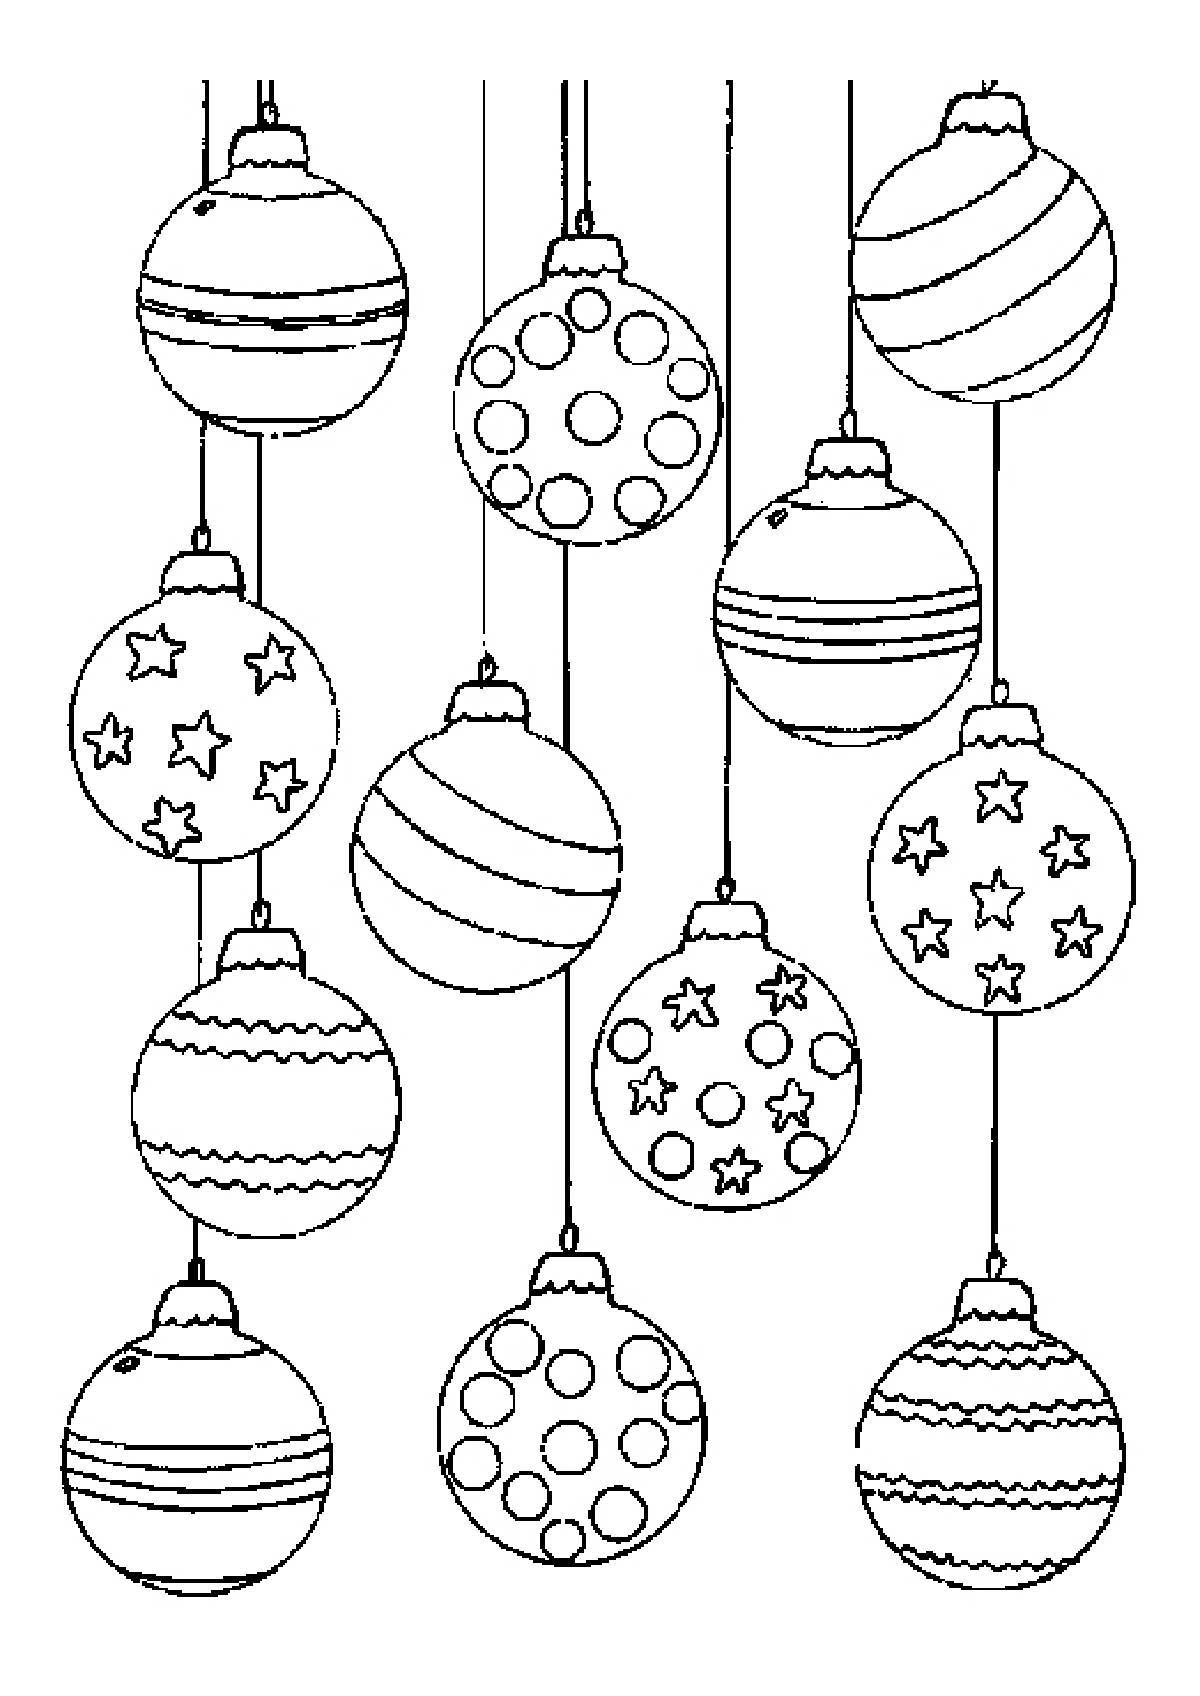 Colorful Christmas decorations coloring page